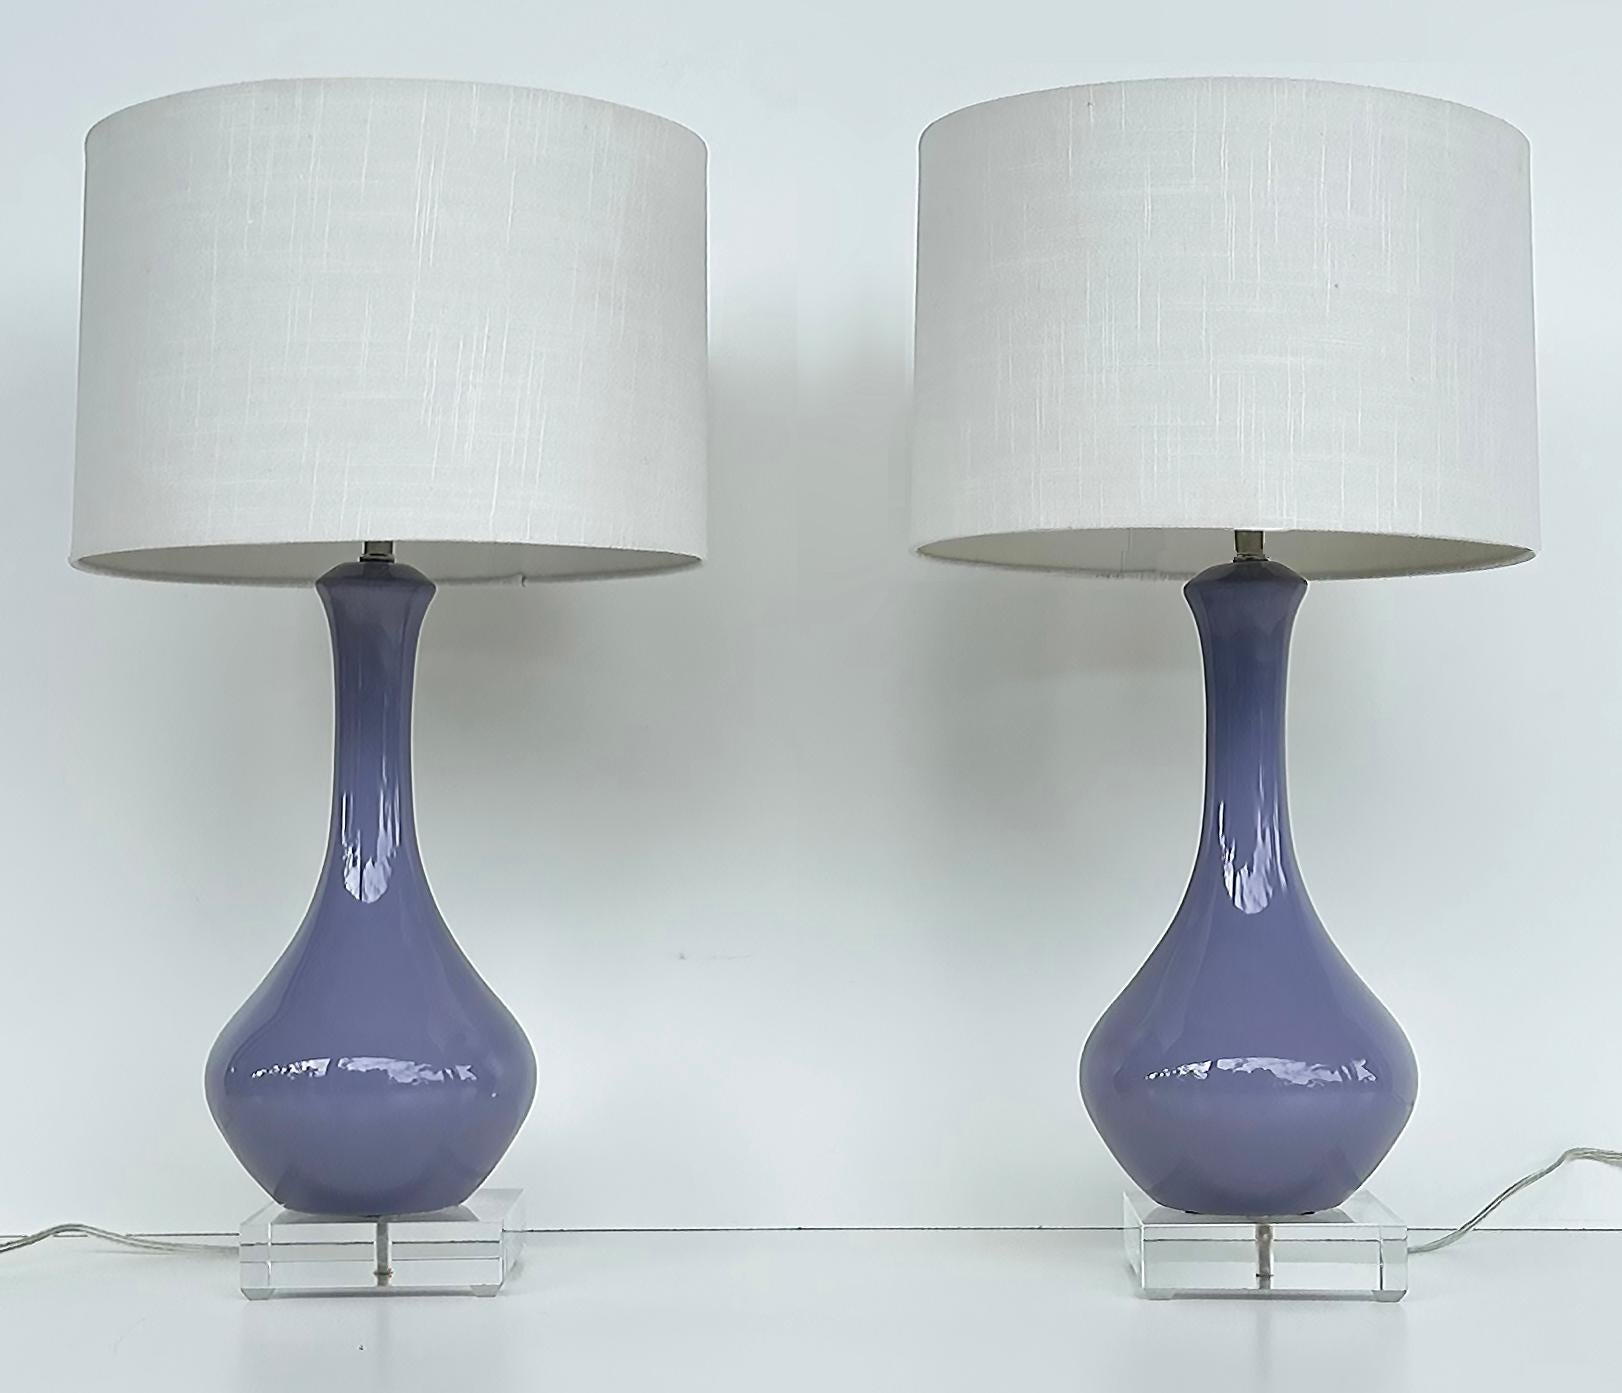 Vintage Modern Ceramic Table Lamps on Square Lucite Bases 

Offered for sale is a vintage pair of ceramic table lamps raised on thick square lucite bases.  The lamps are wired and in working condition.  They include the harps and finials but not the